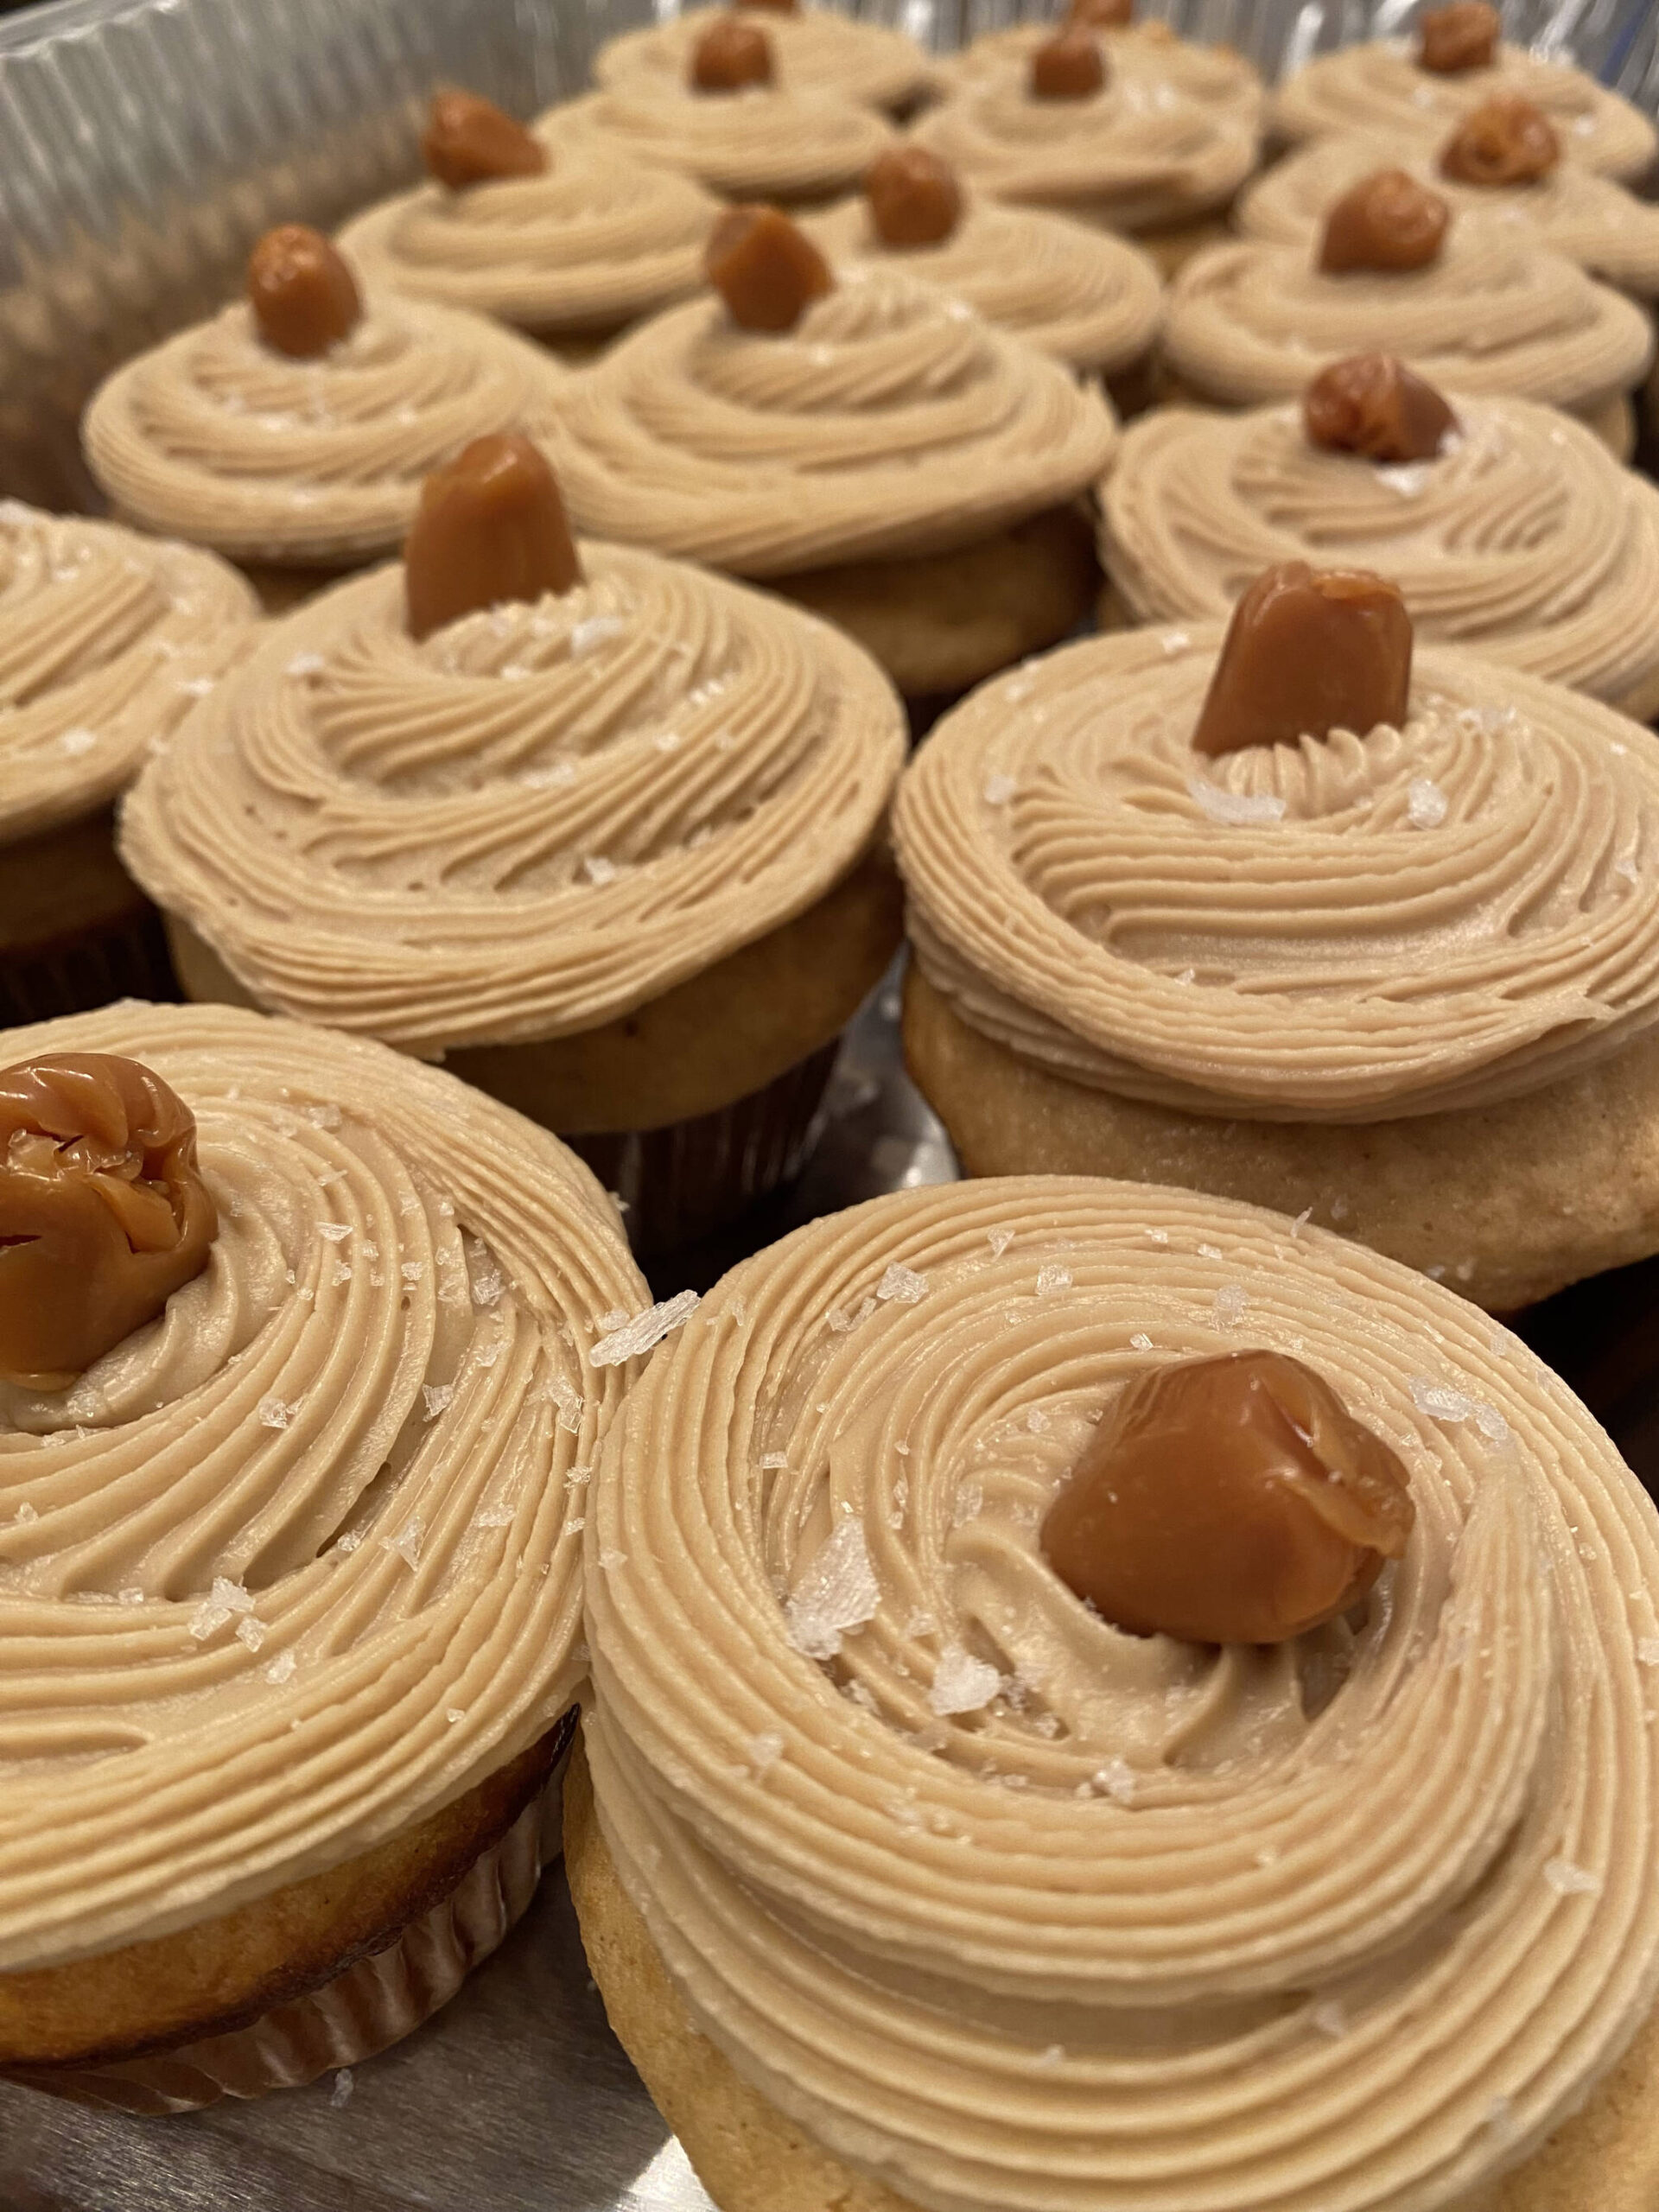 These salted caramel cupcakes topped with caramel candy balance sweetness with Maldon salt. (Photo by Tressa Dale/Peninsula Clarion)